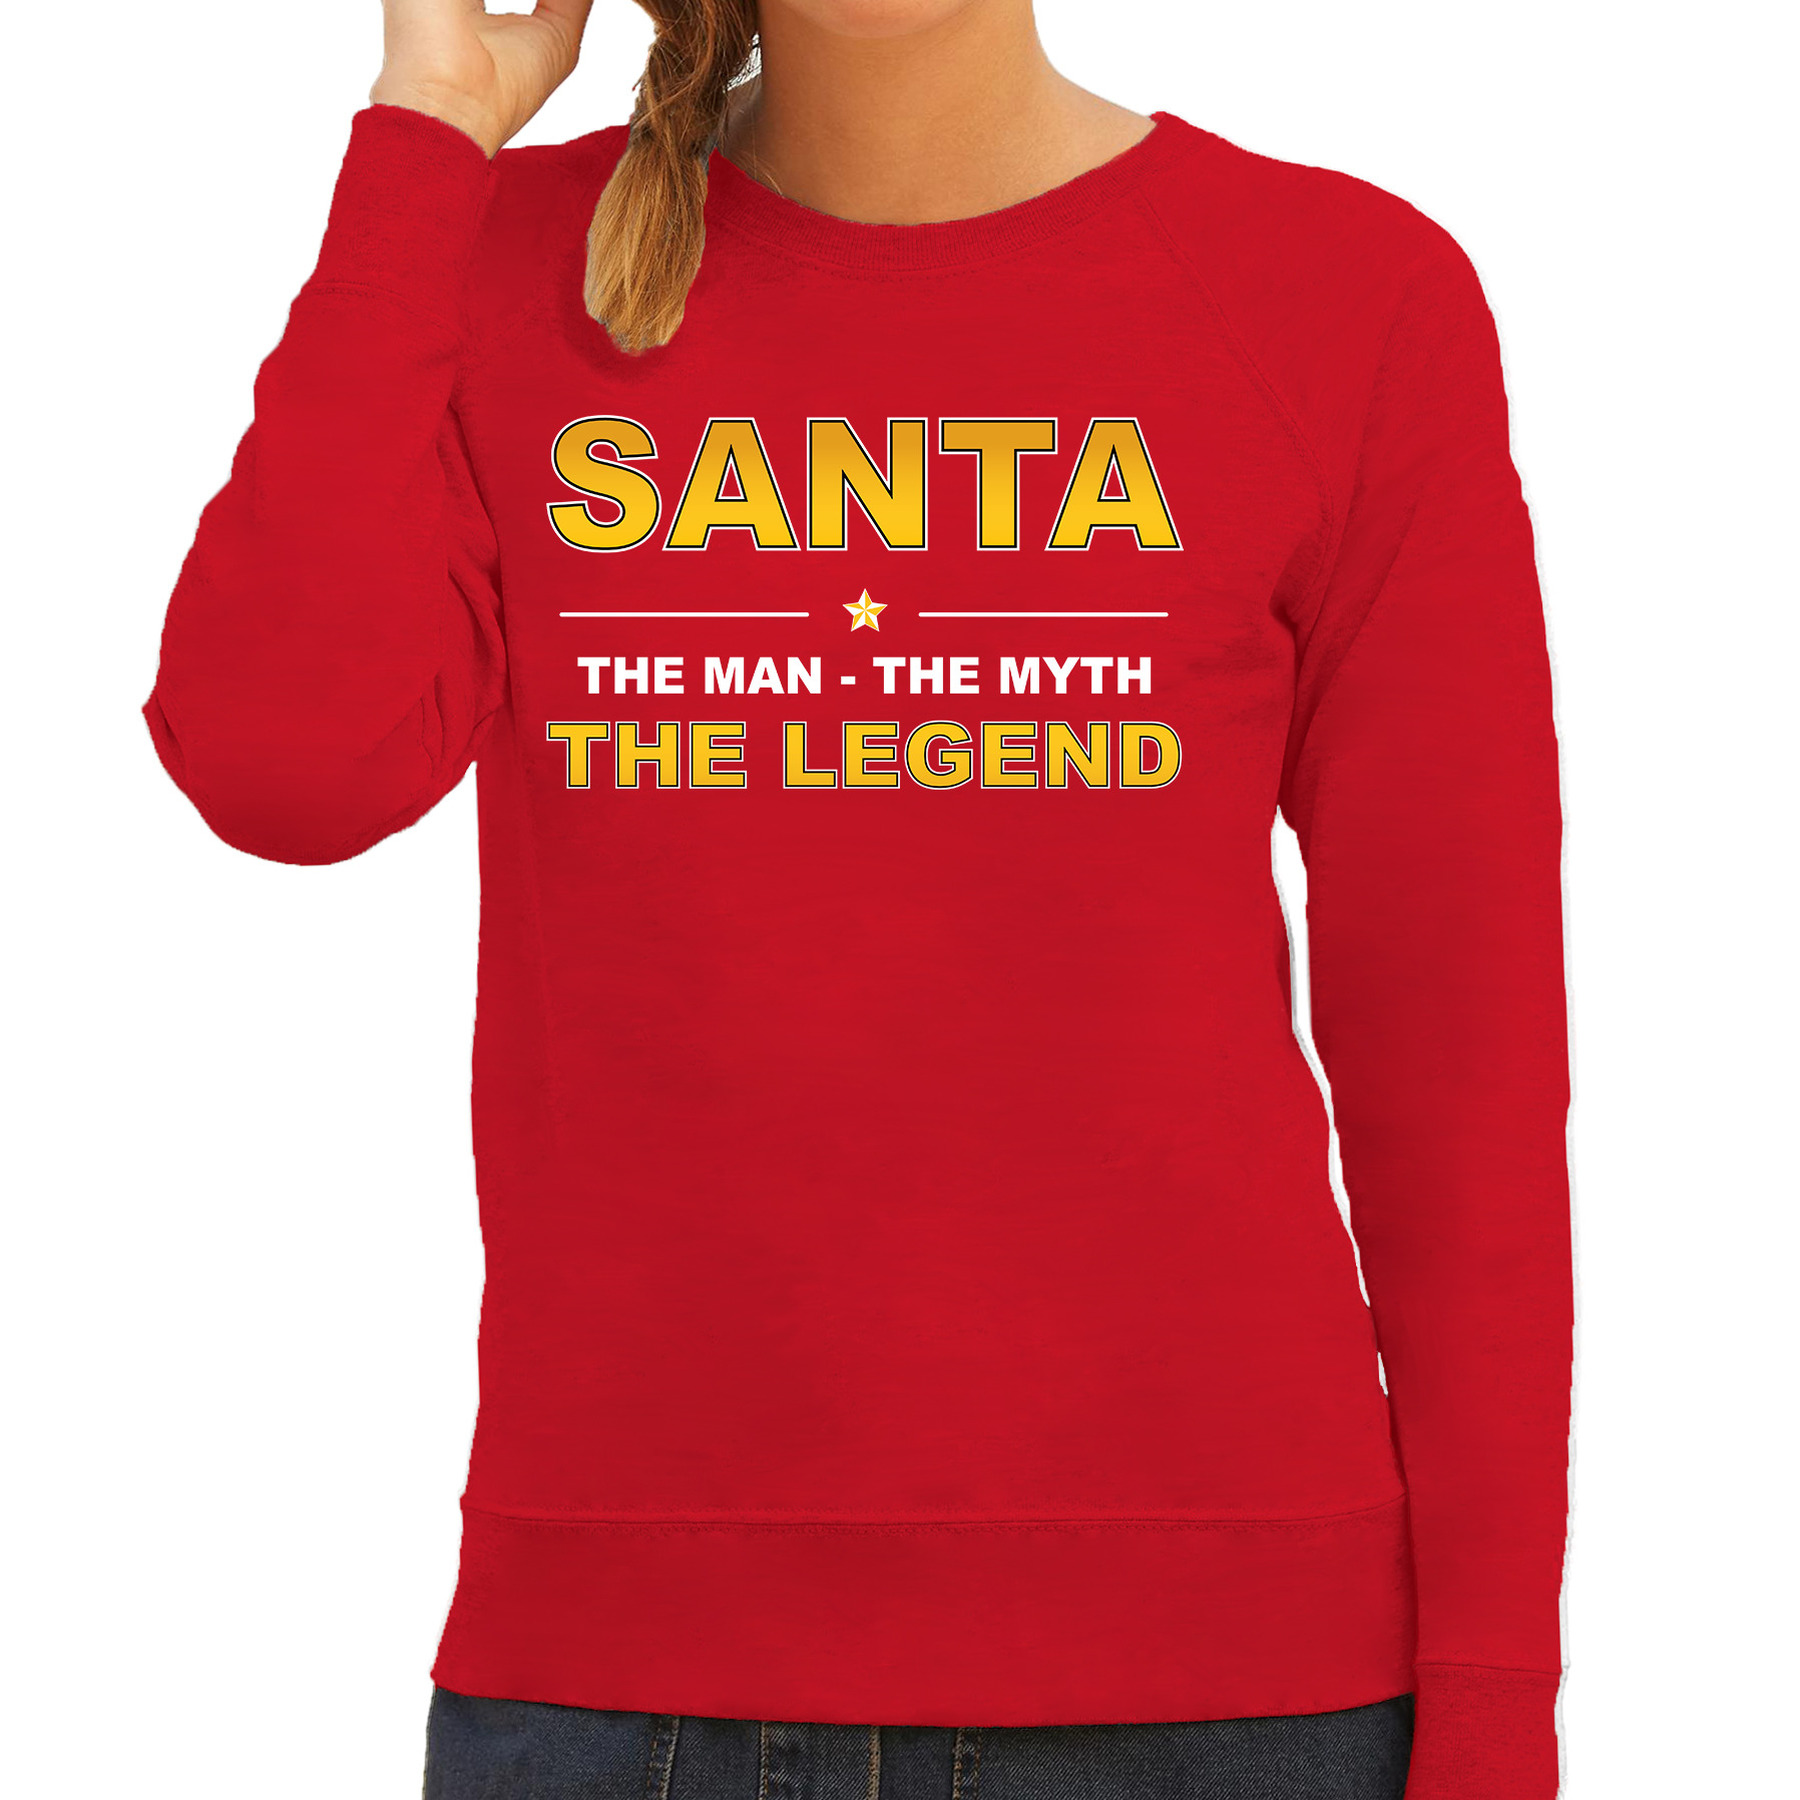 Santa kersttrui sweater-outfit-the man-the myth-the legend rood voor dames